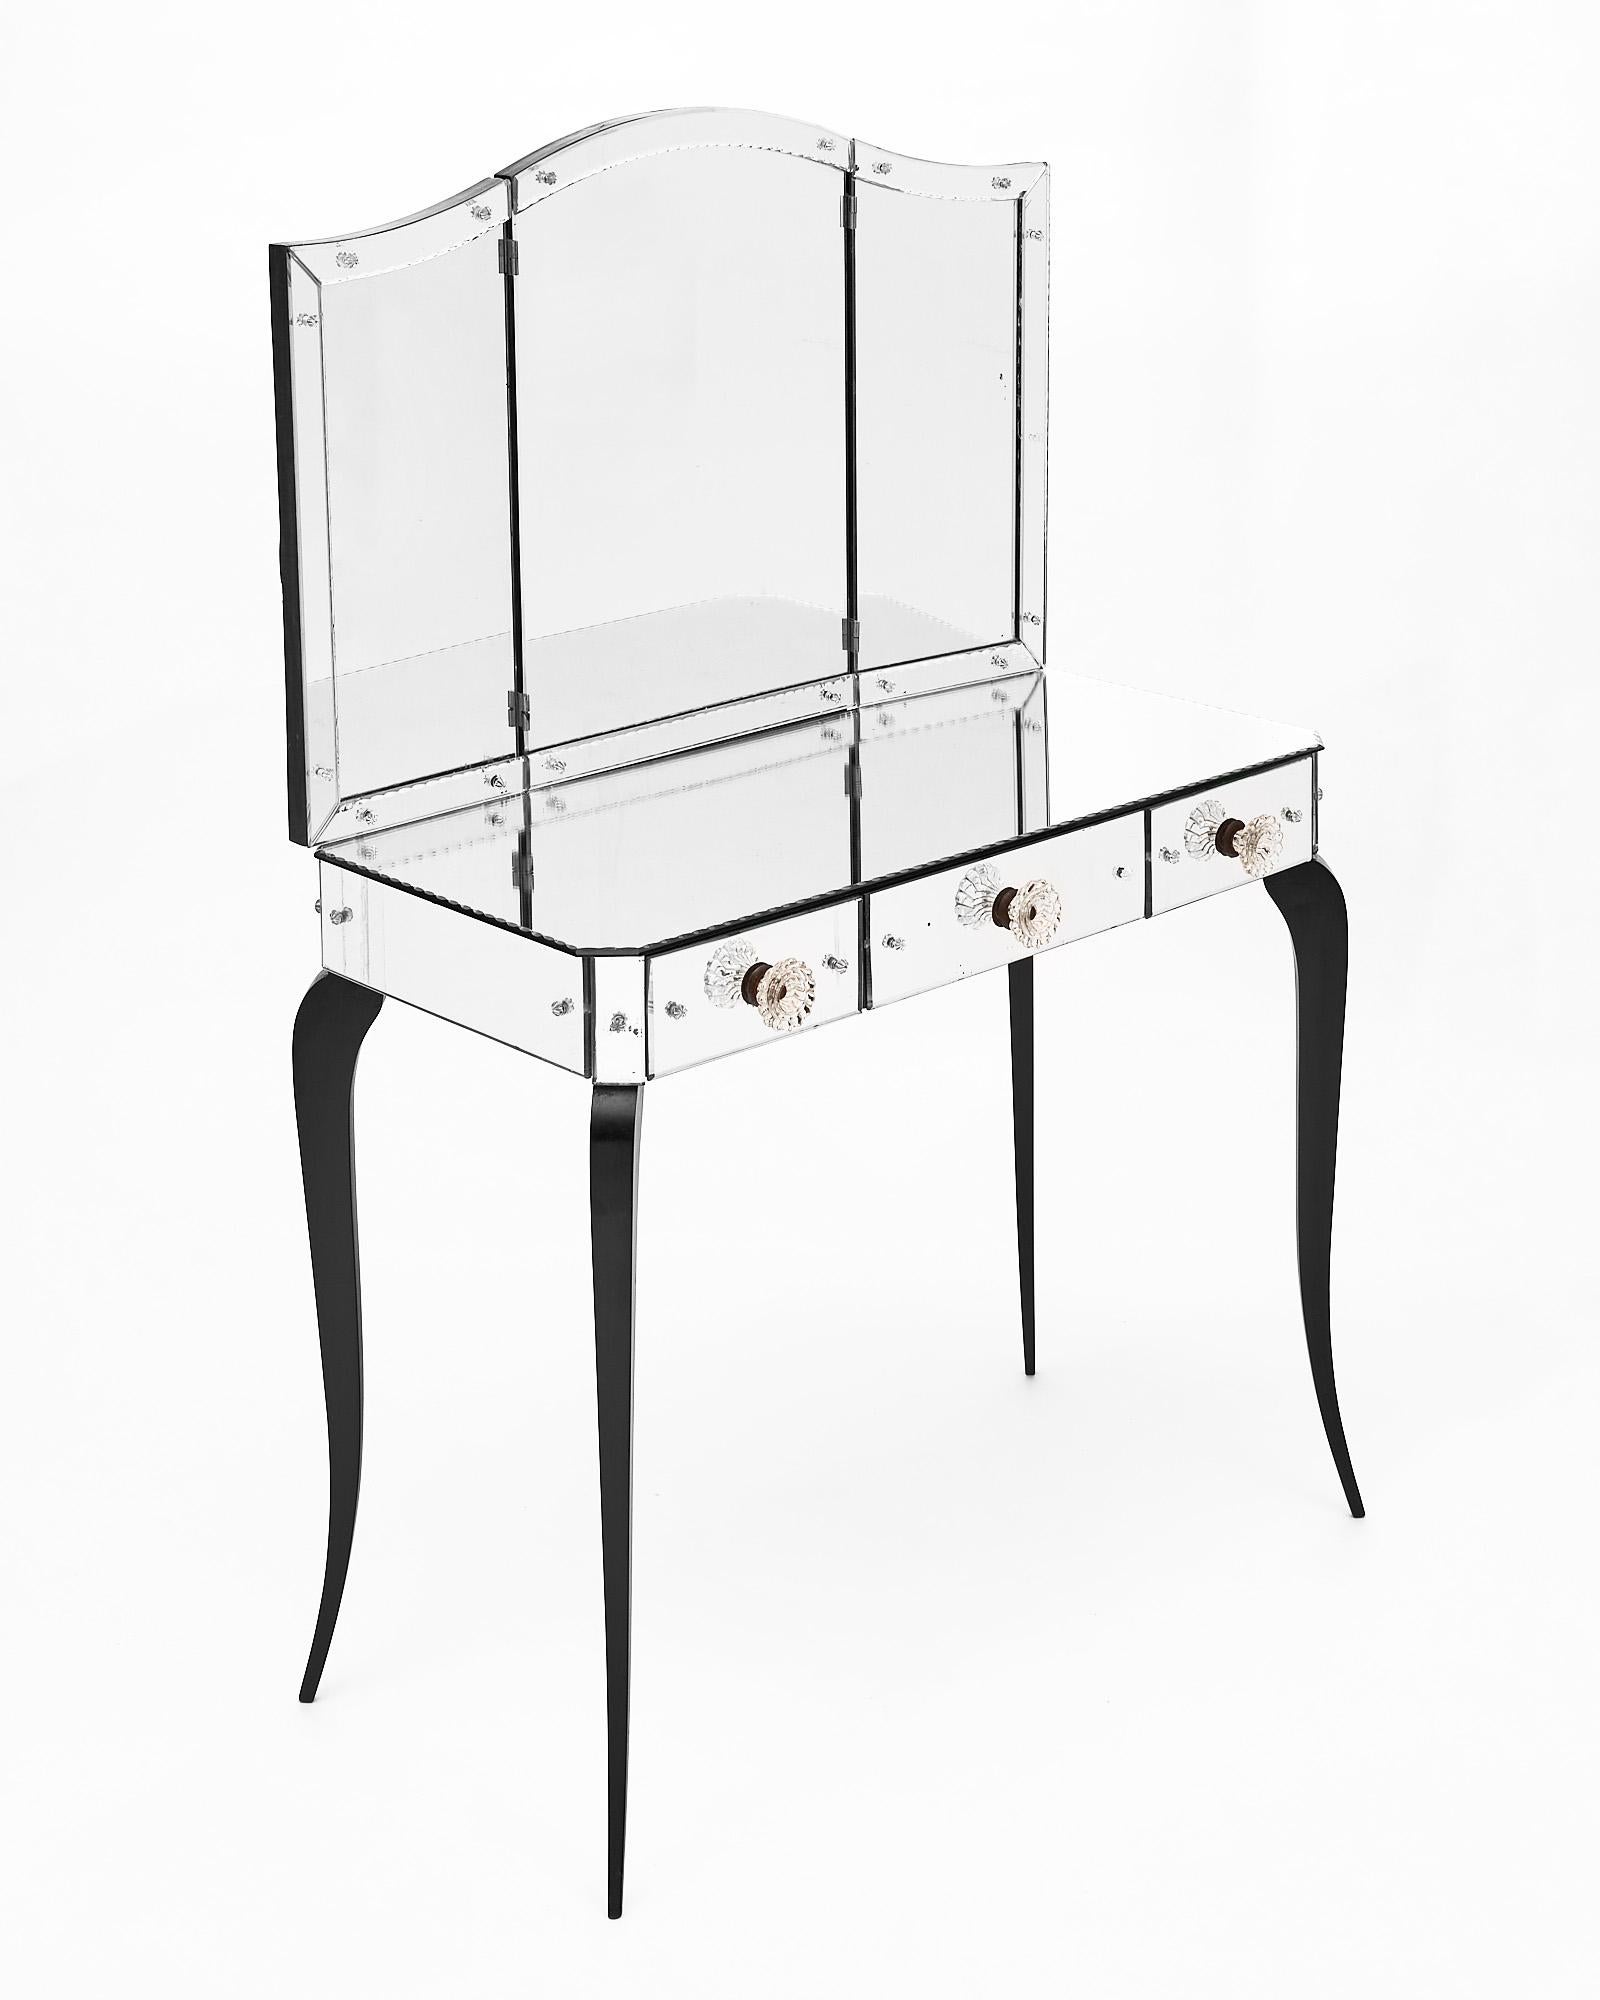 Vanity from France made with a beveled glass veneer and three drawers with original glass pulls. The top has a hinged three part mirror. Fully open, the mirror has a width of 34.25”. The height to the top of the vanity table is 30.5”. From the floor